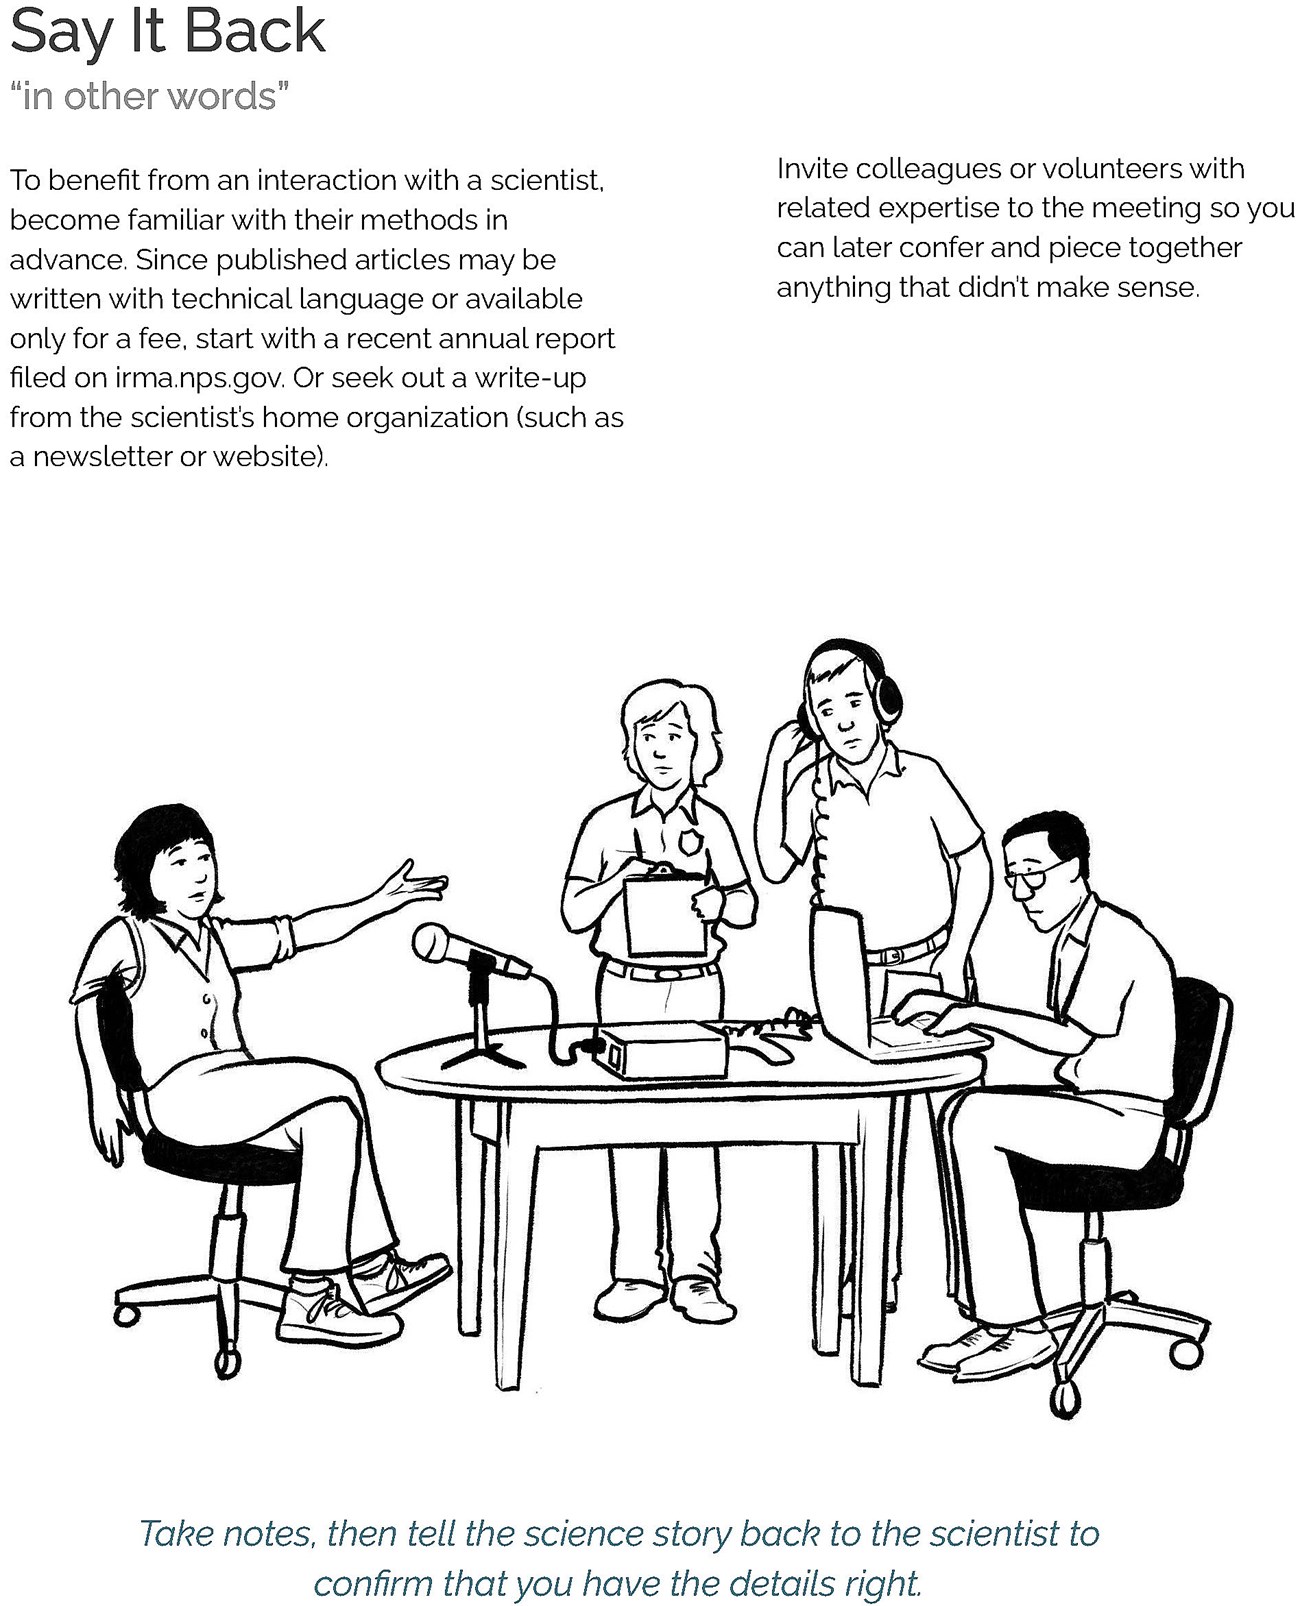 a page with the title "Say It back" with text and an illustration of a group of people gathered around a table, with one person speaking into a microphone and the rest listening and taking notes